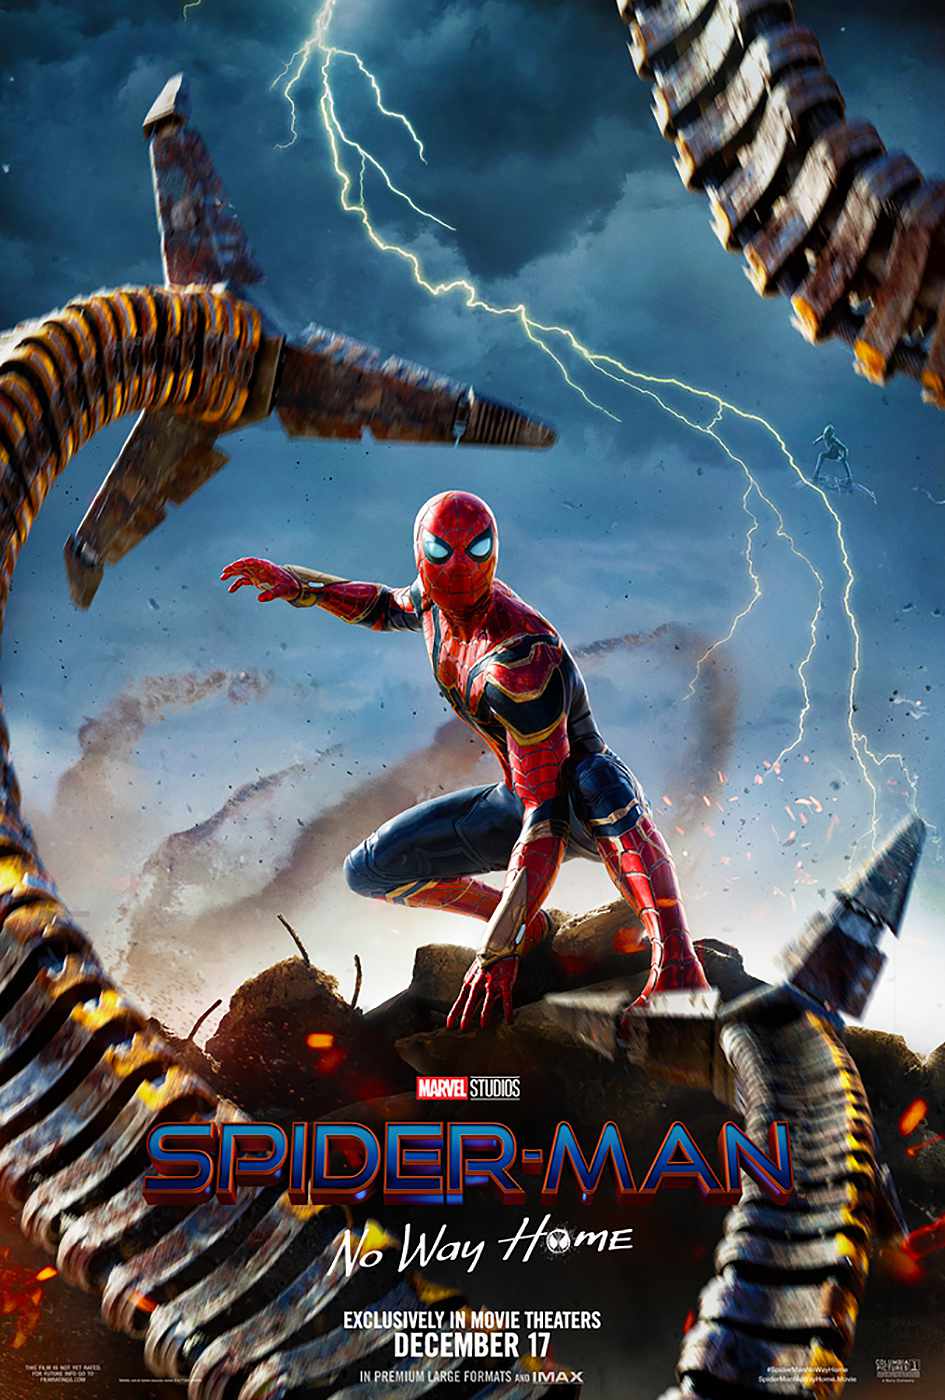 Spiderman far From Home Movie Large Poster Art Print 